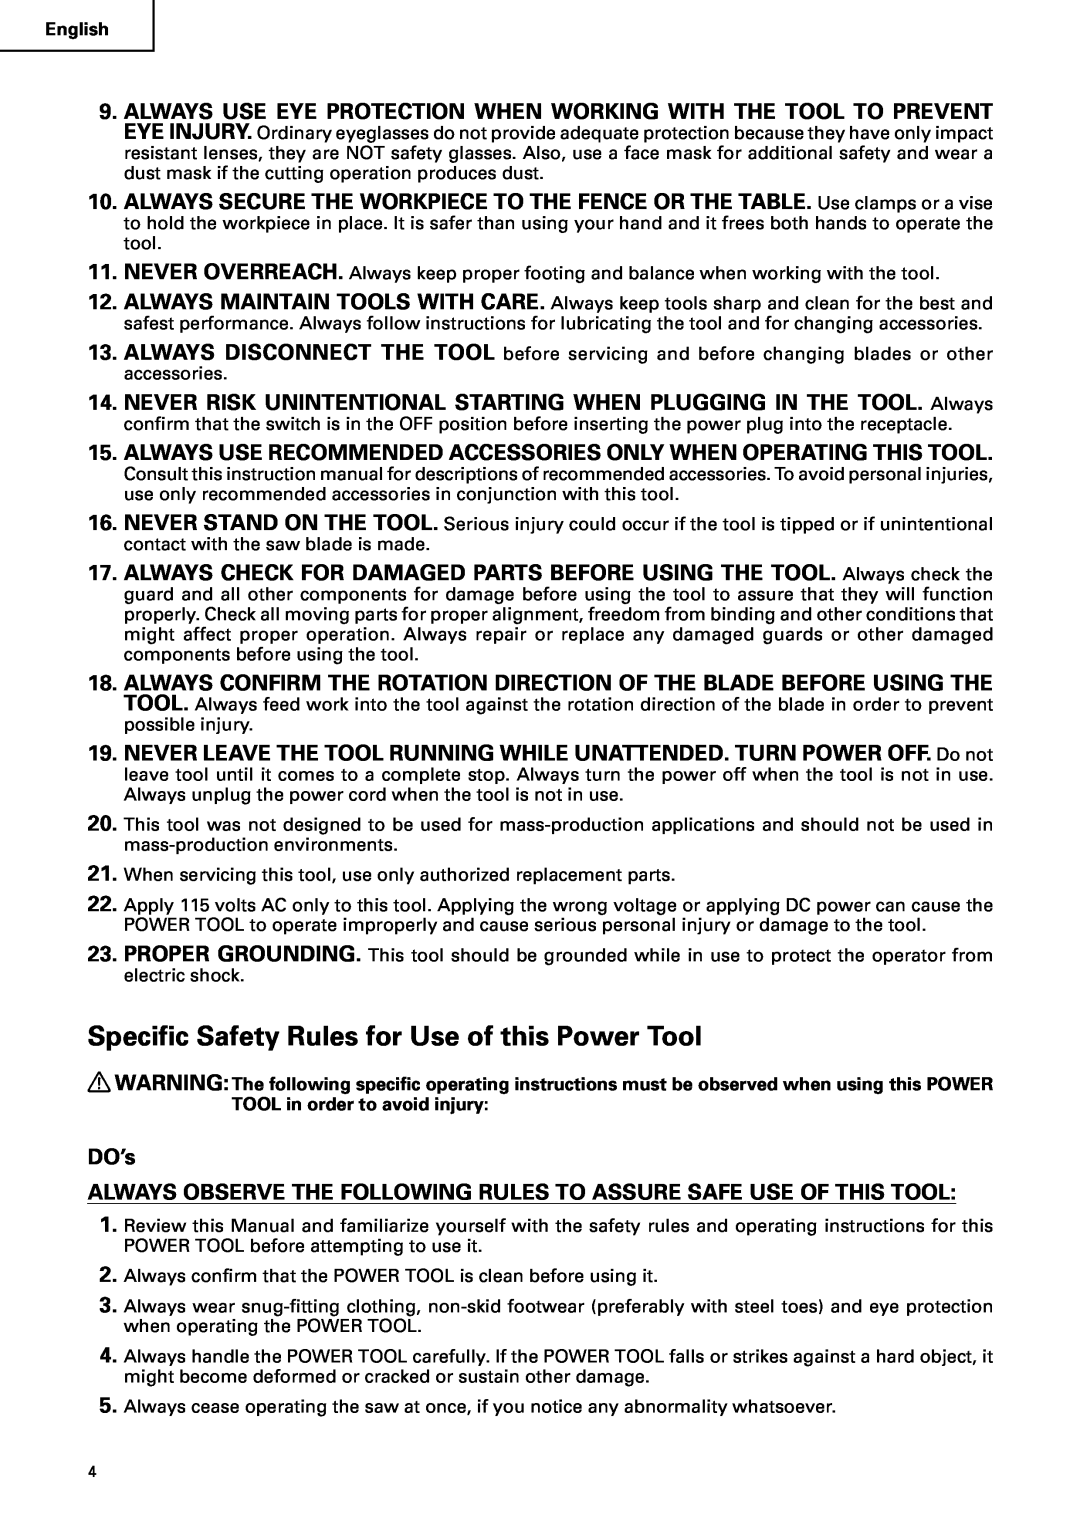 Hitachi C10RA2 instruction manual Specific Safety Rules for Use of this Power Tool, DO’s 